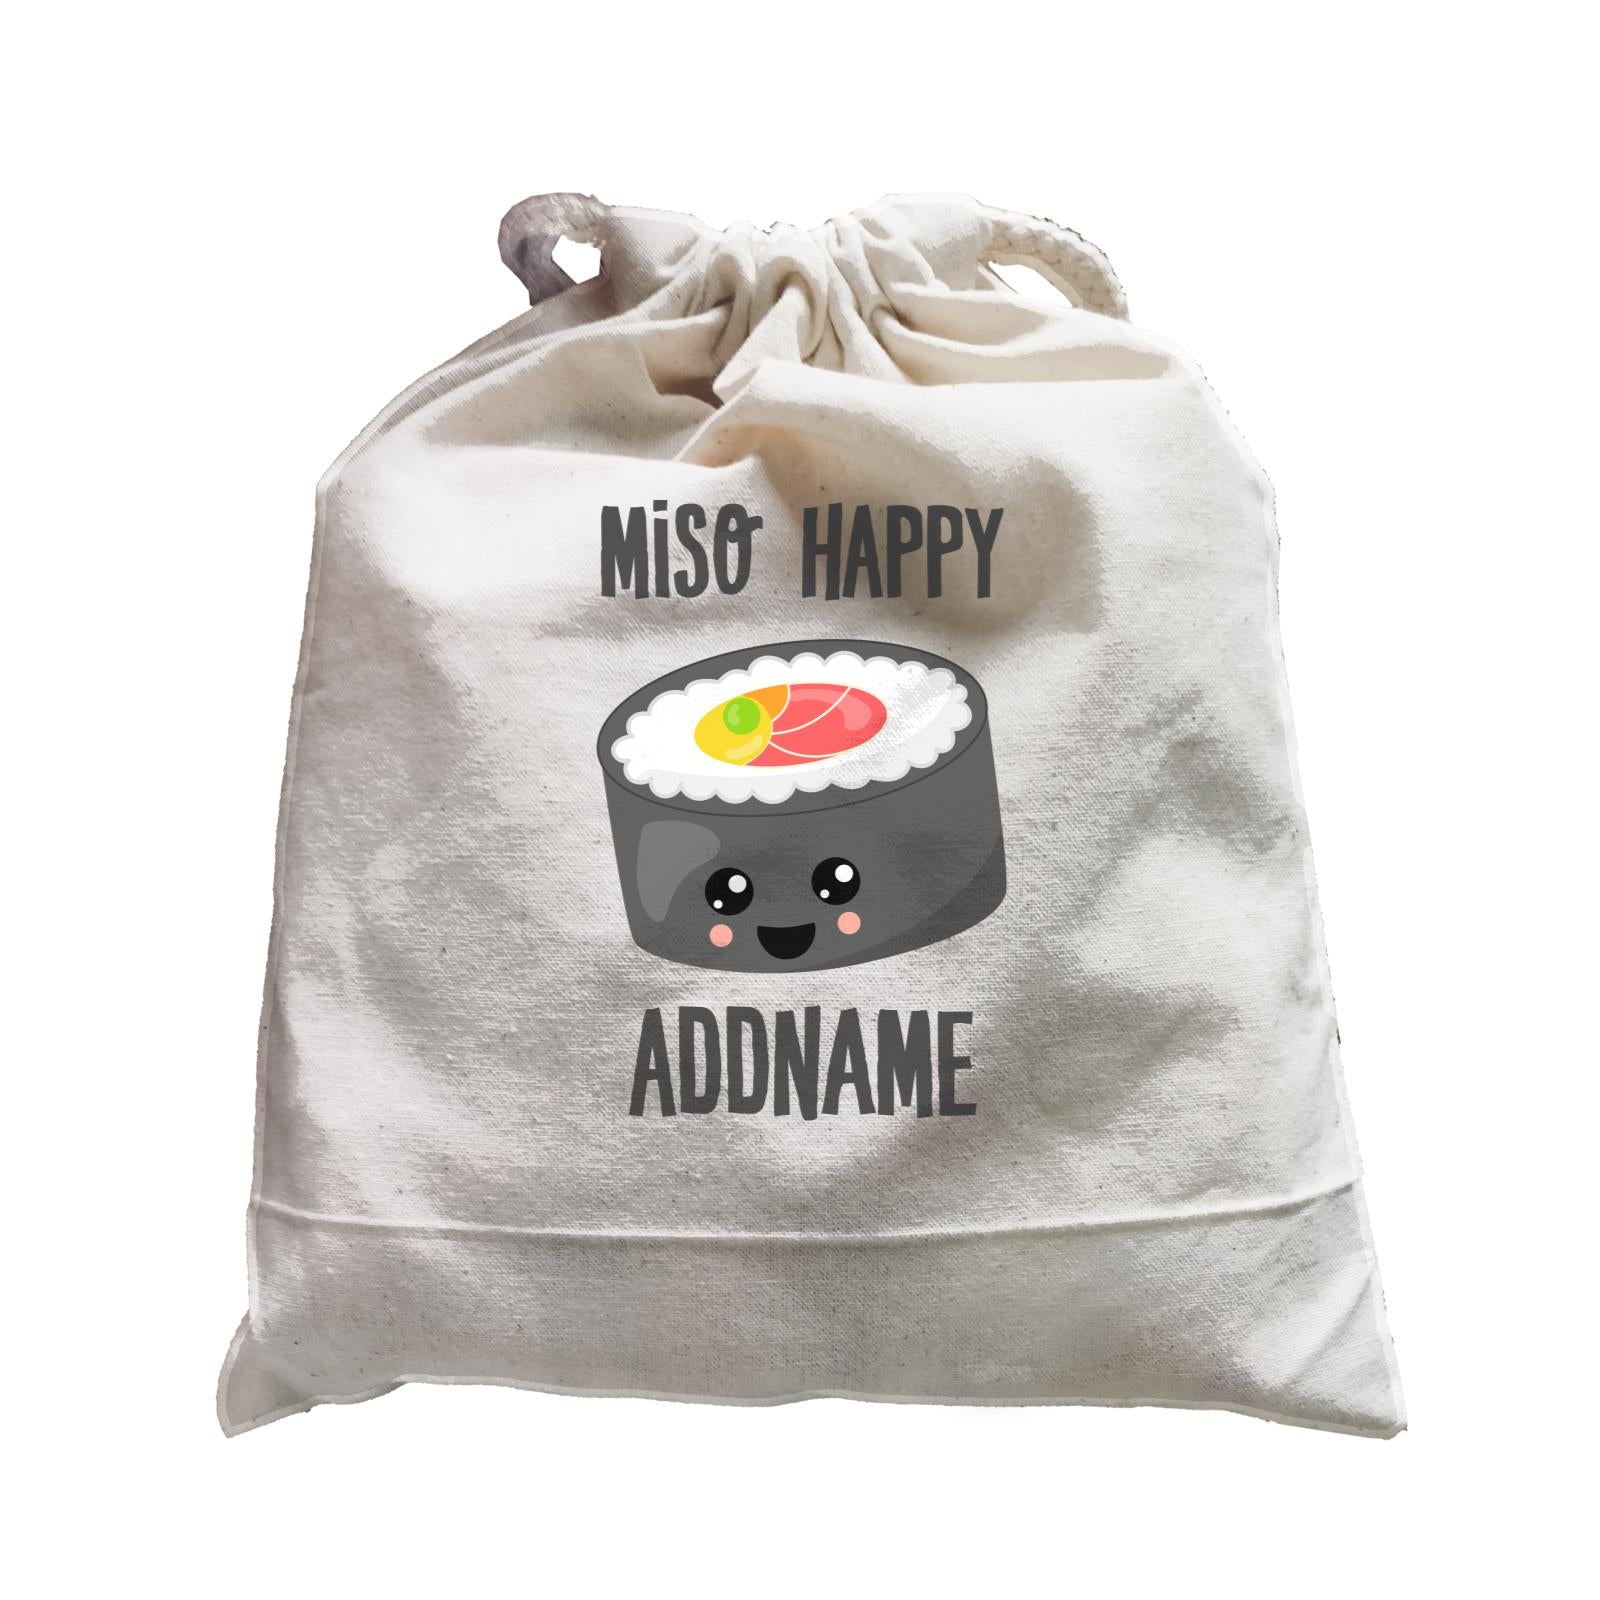 Miso Happy Sushi Circle Roll Addname Satchel